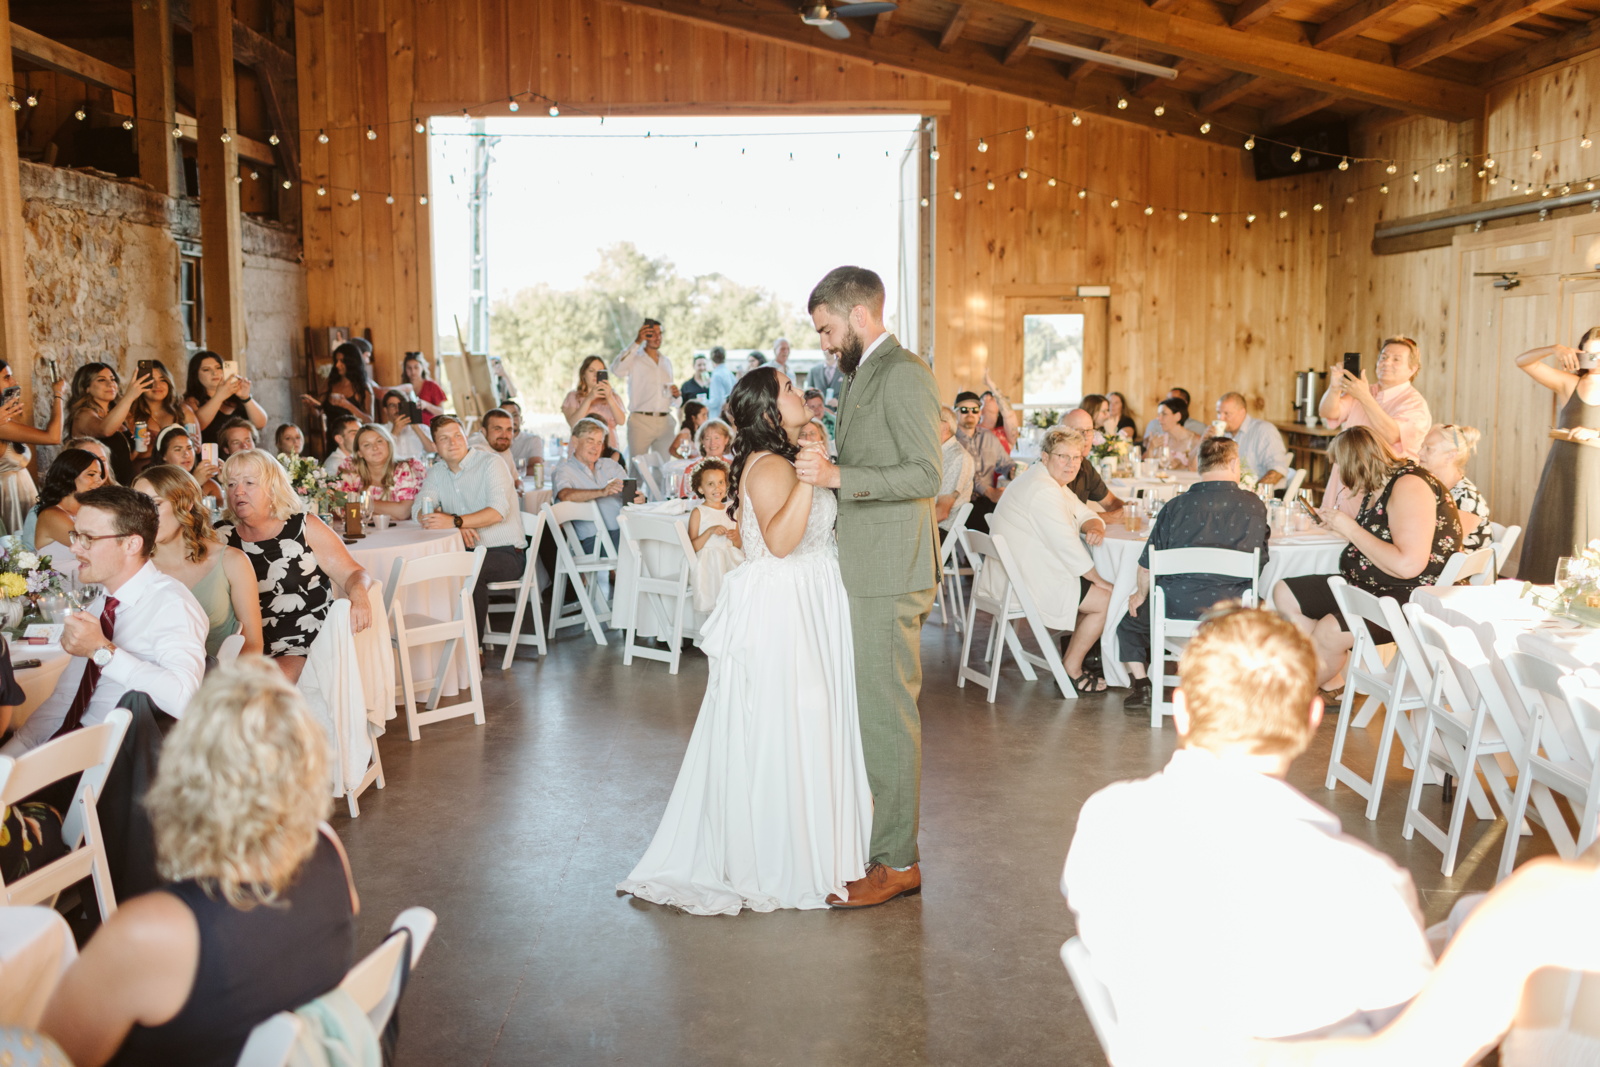 First dance in the Barn